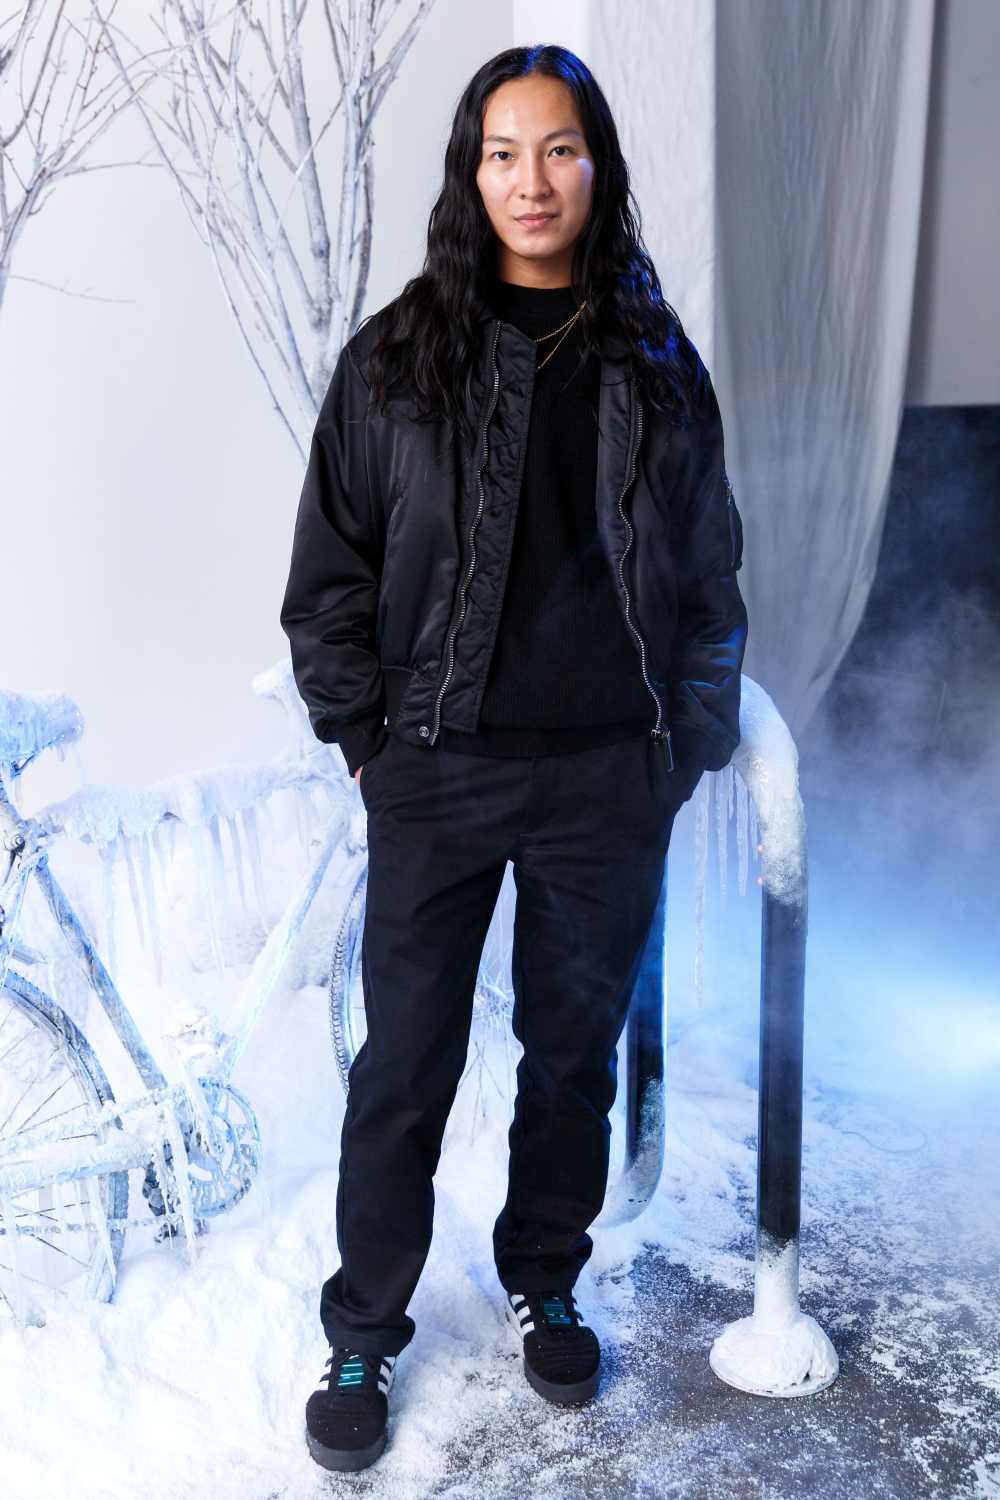 UNIQLO launches new HEATTECH LifeWear designed by Alexander Wang